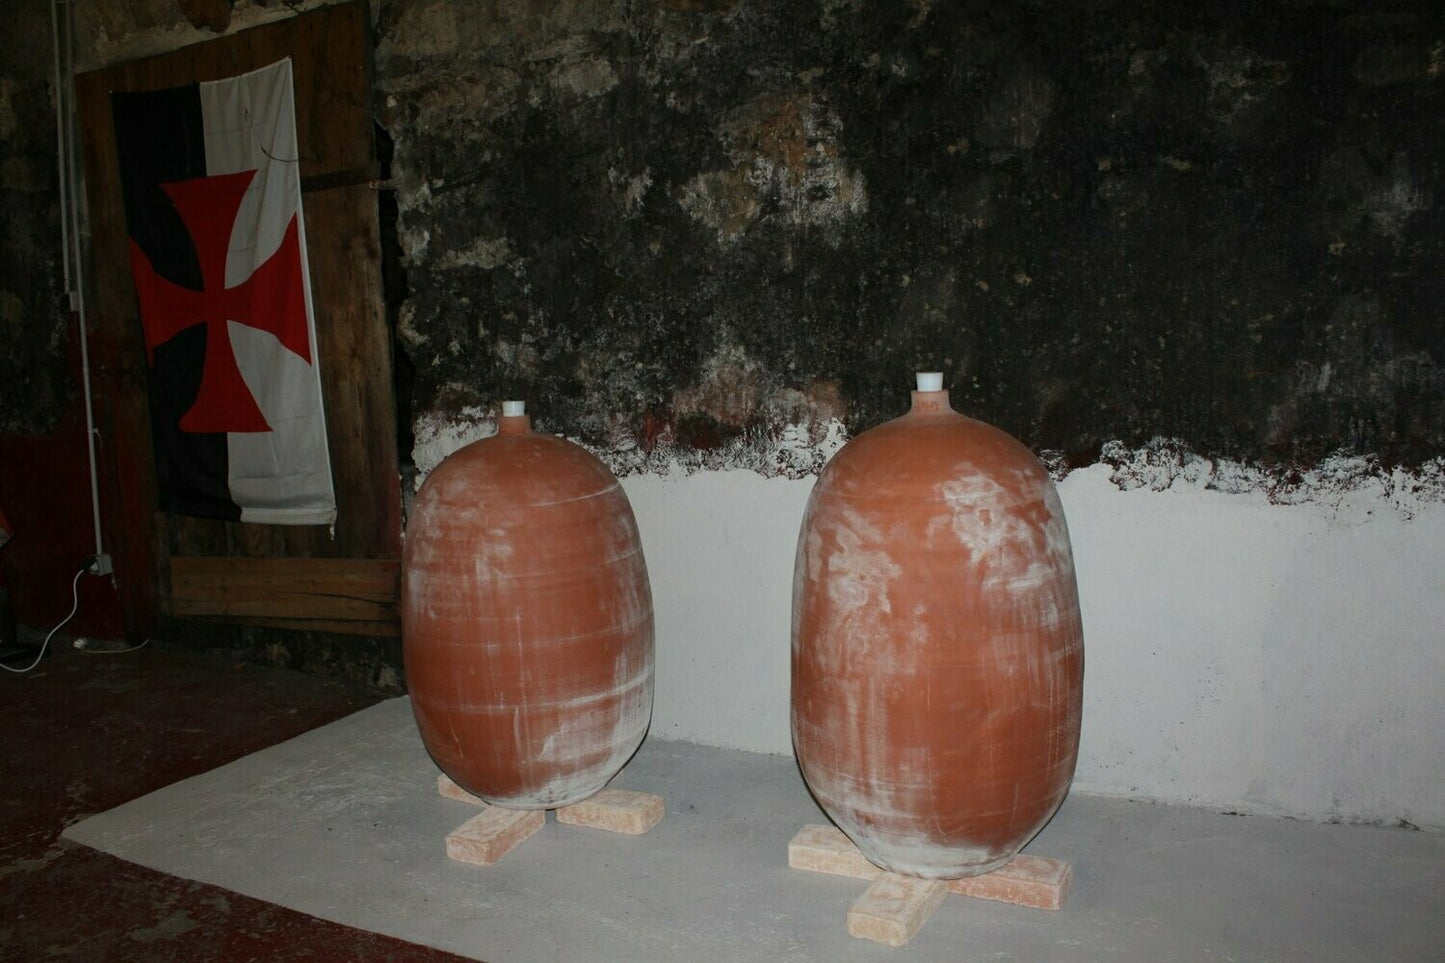 V Gallo-Roman from Narbonnaise WHITE - Honeyed and Spiced Wine from the 1st Century